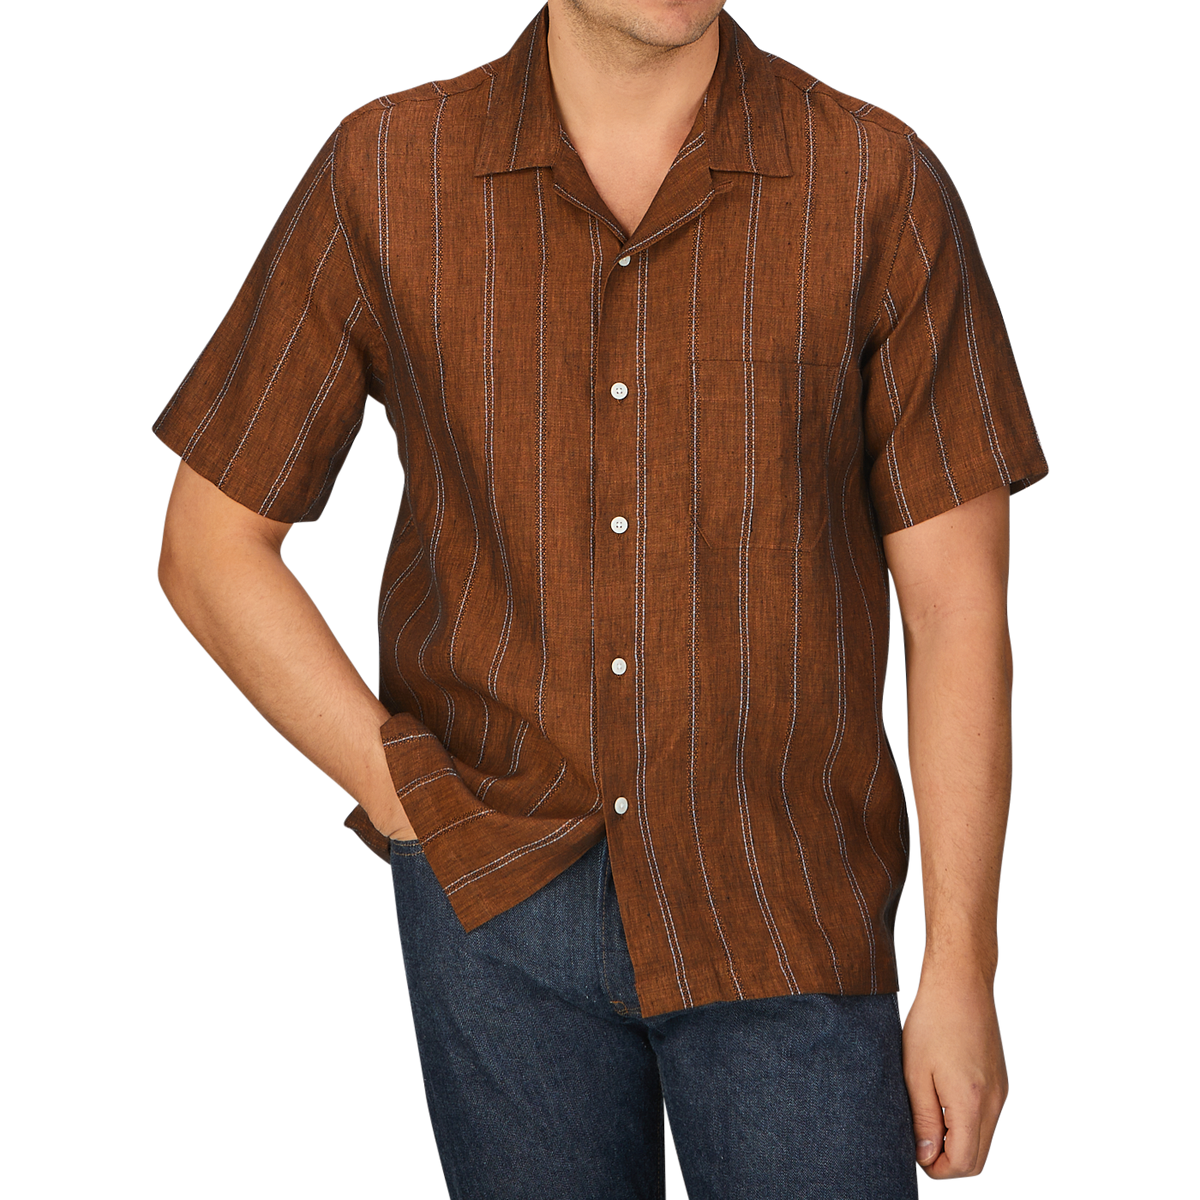 A man wearing a Rust Brown Striped Linen Road Universal Works camp collar shirt and jeans.